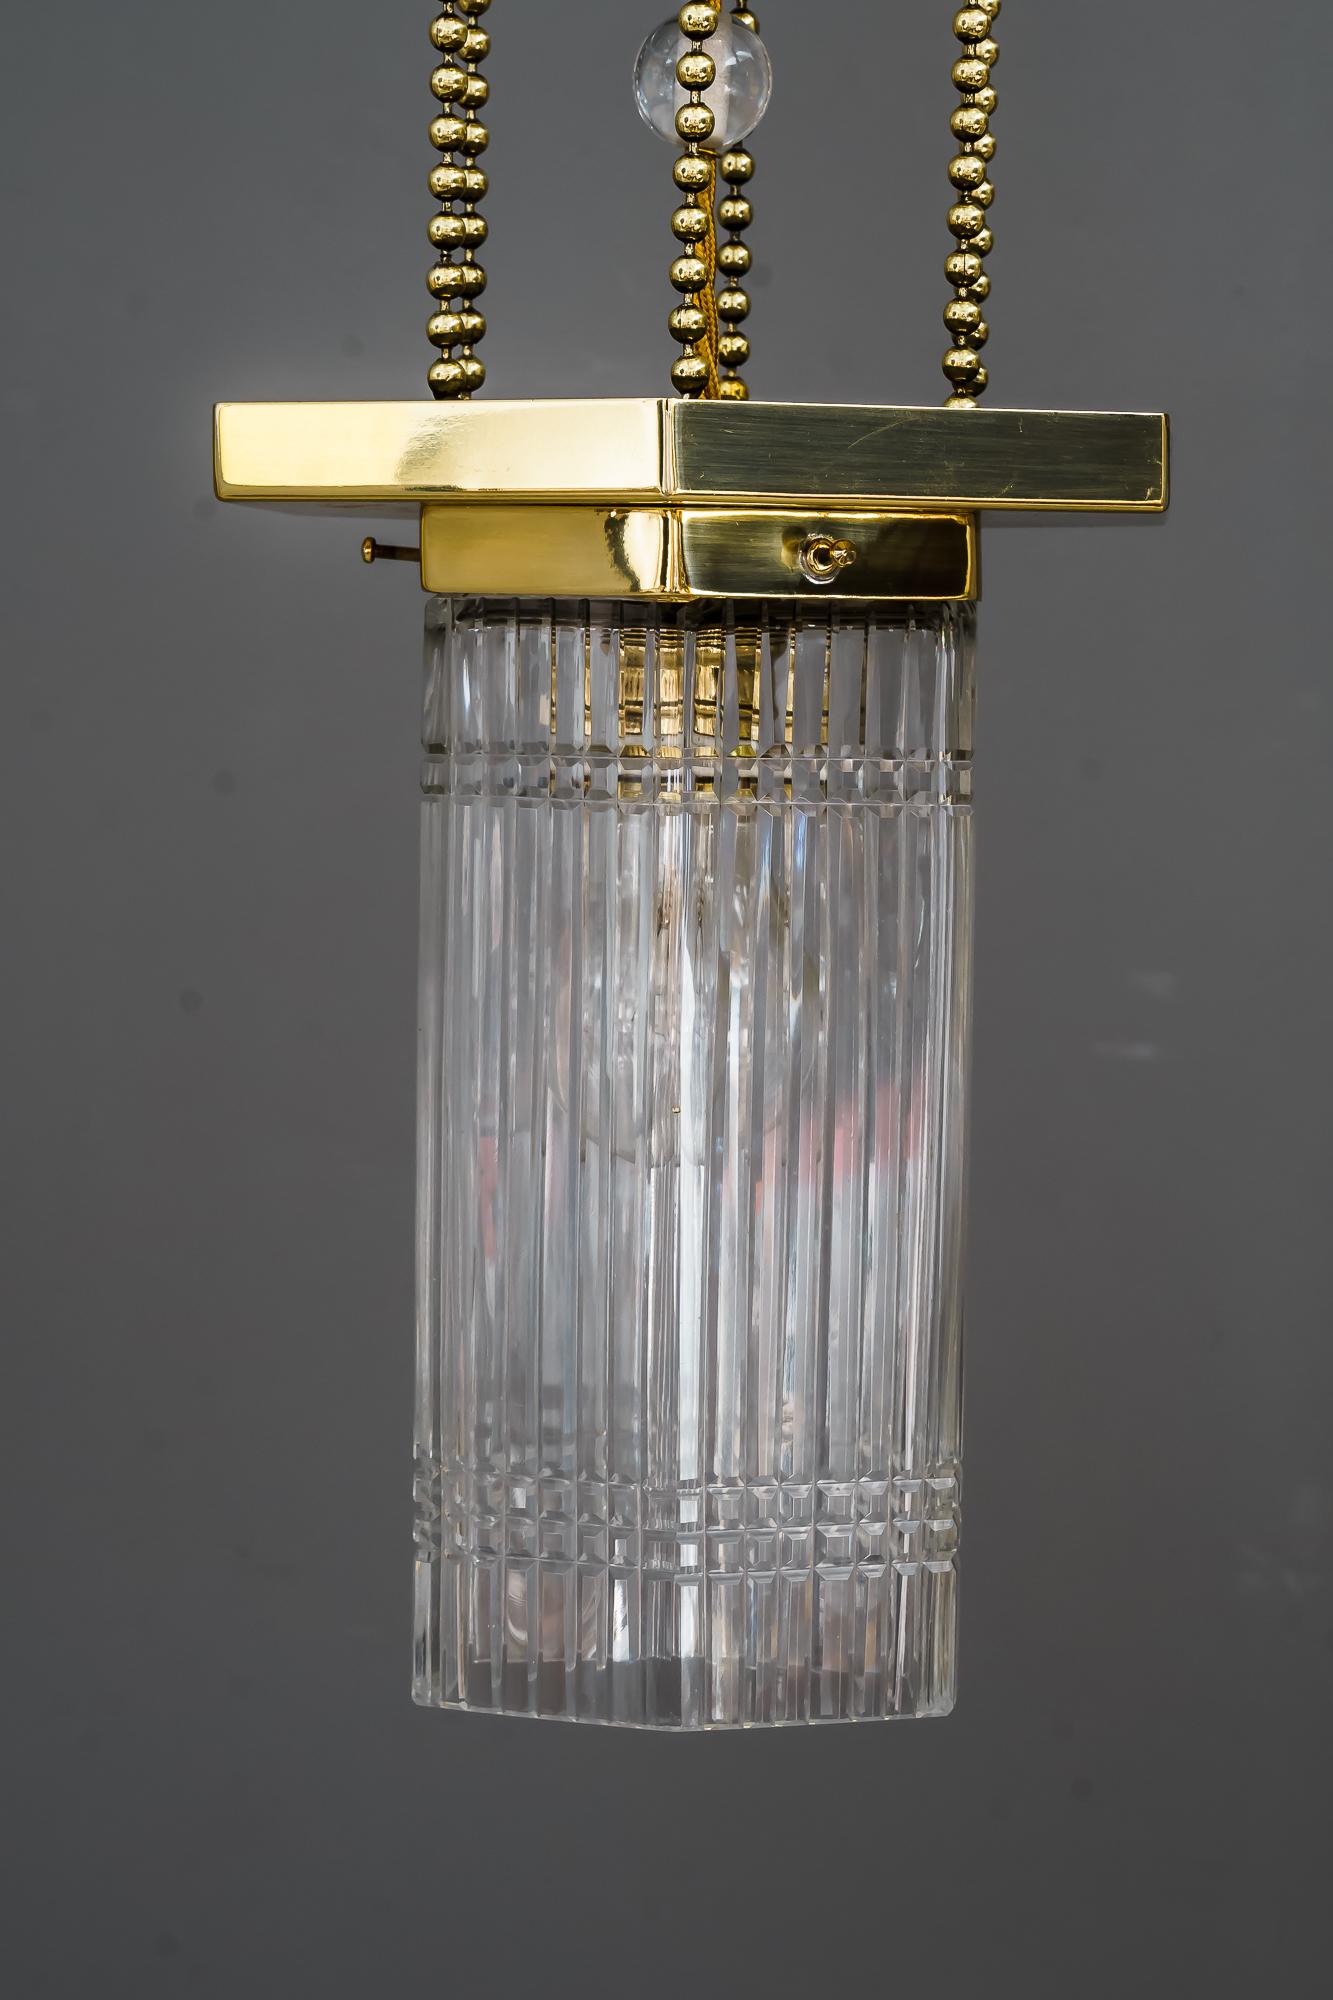 Hexagonal art deco pendant with original glass shade, around 1920s
Brass polished and stove enameled.